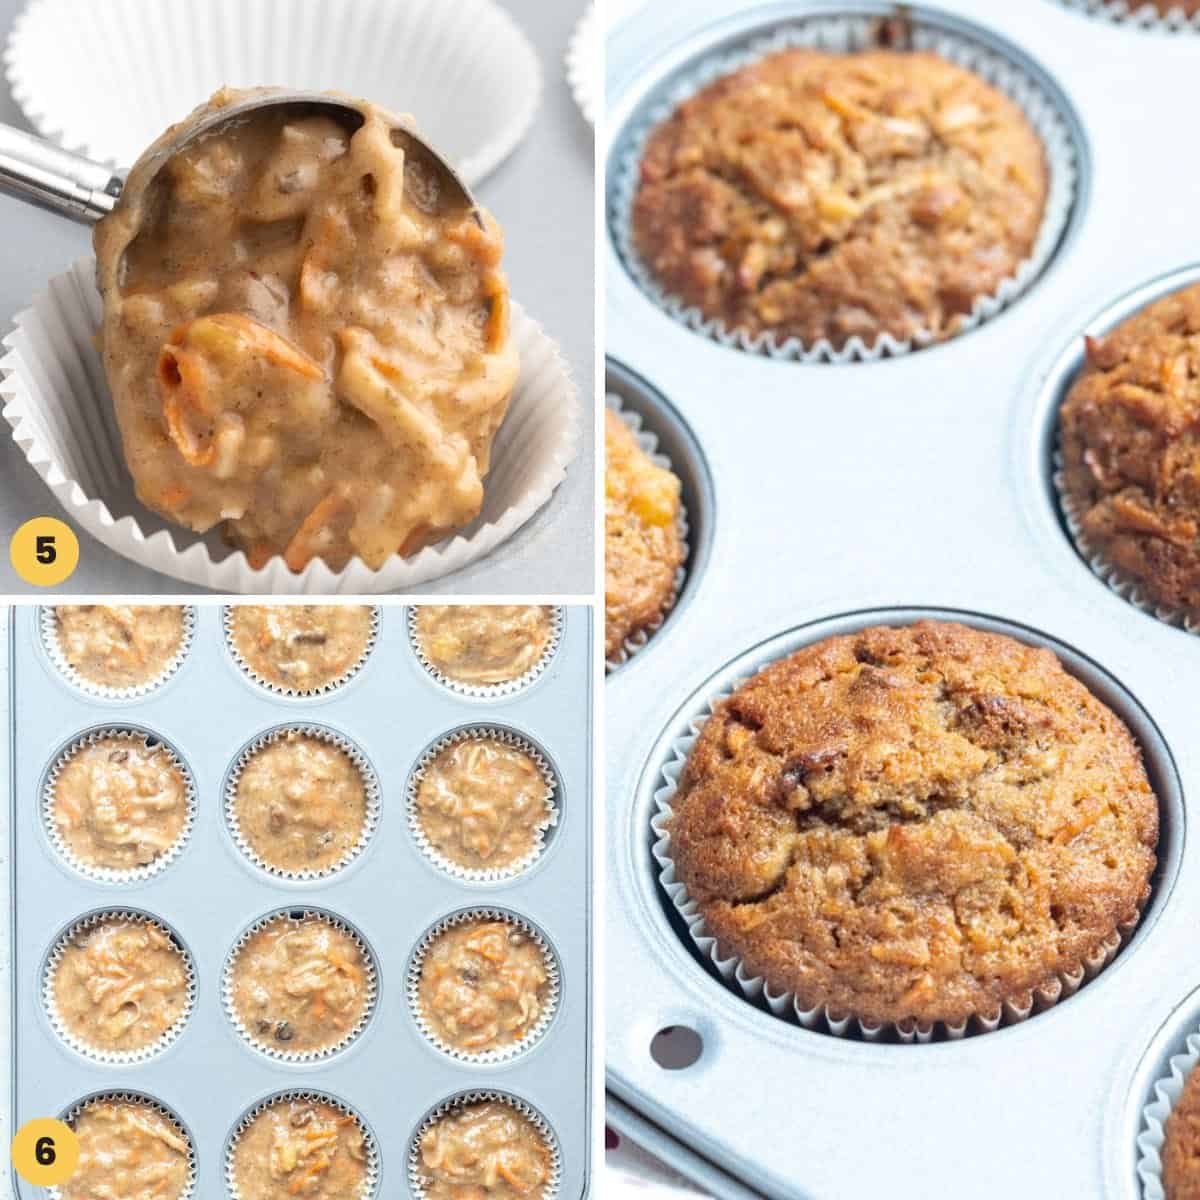 a collage of three images showing how to bake morning glory muffins in paper liners, in a muffin pan.